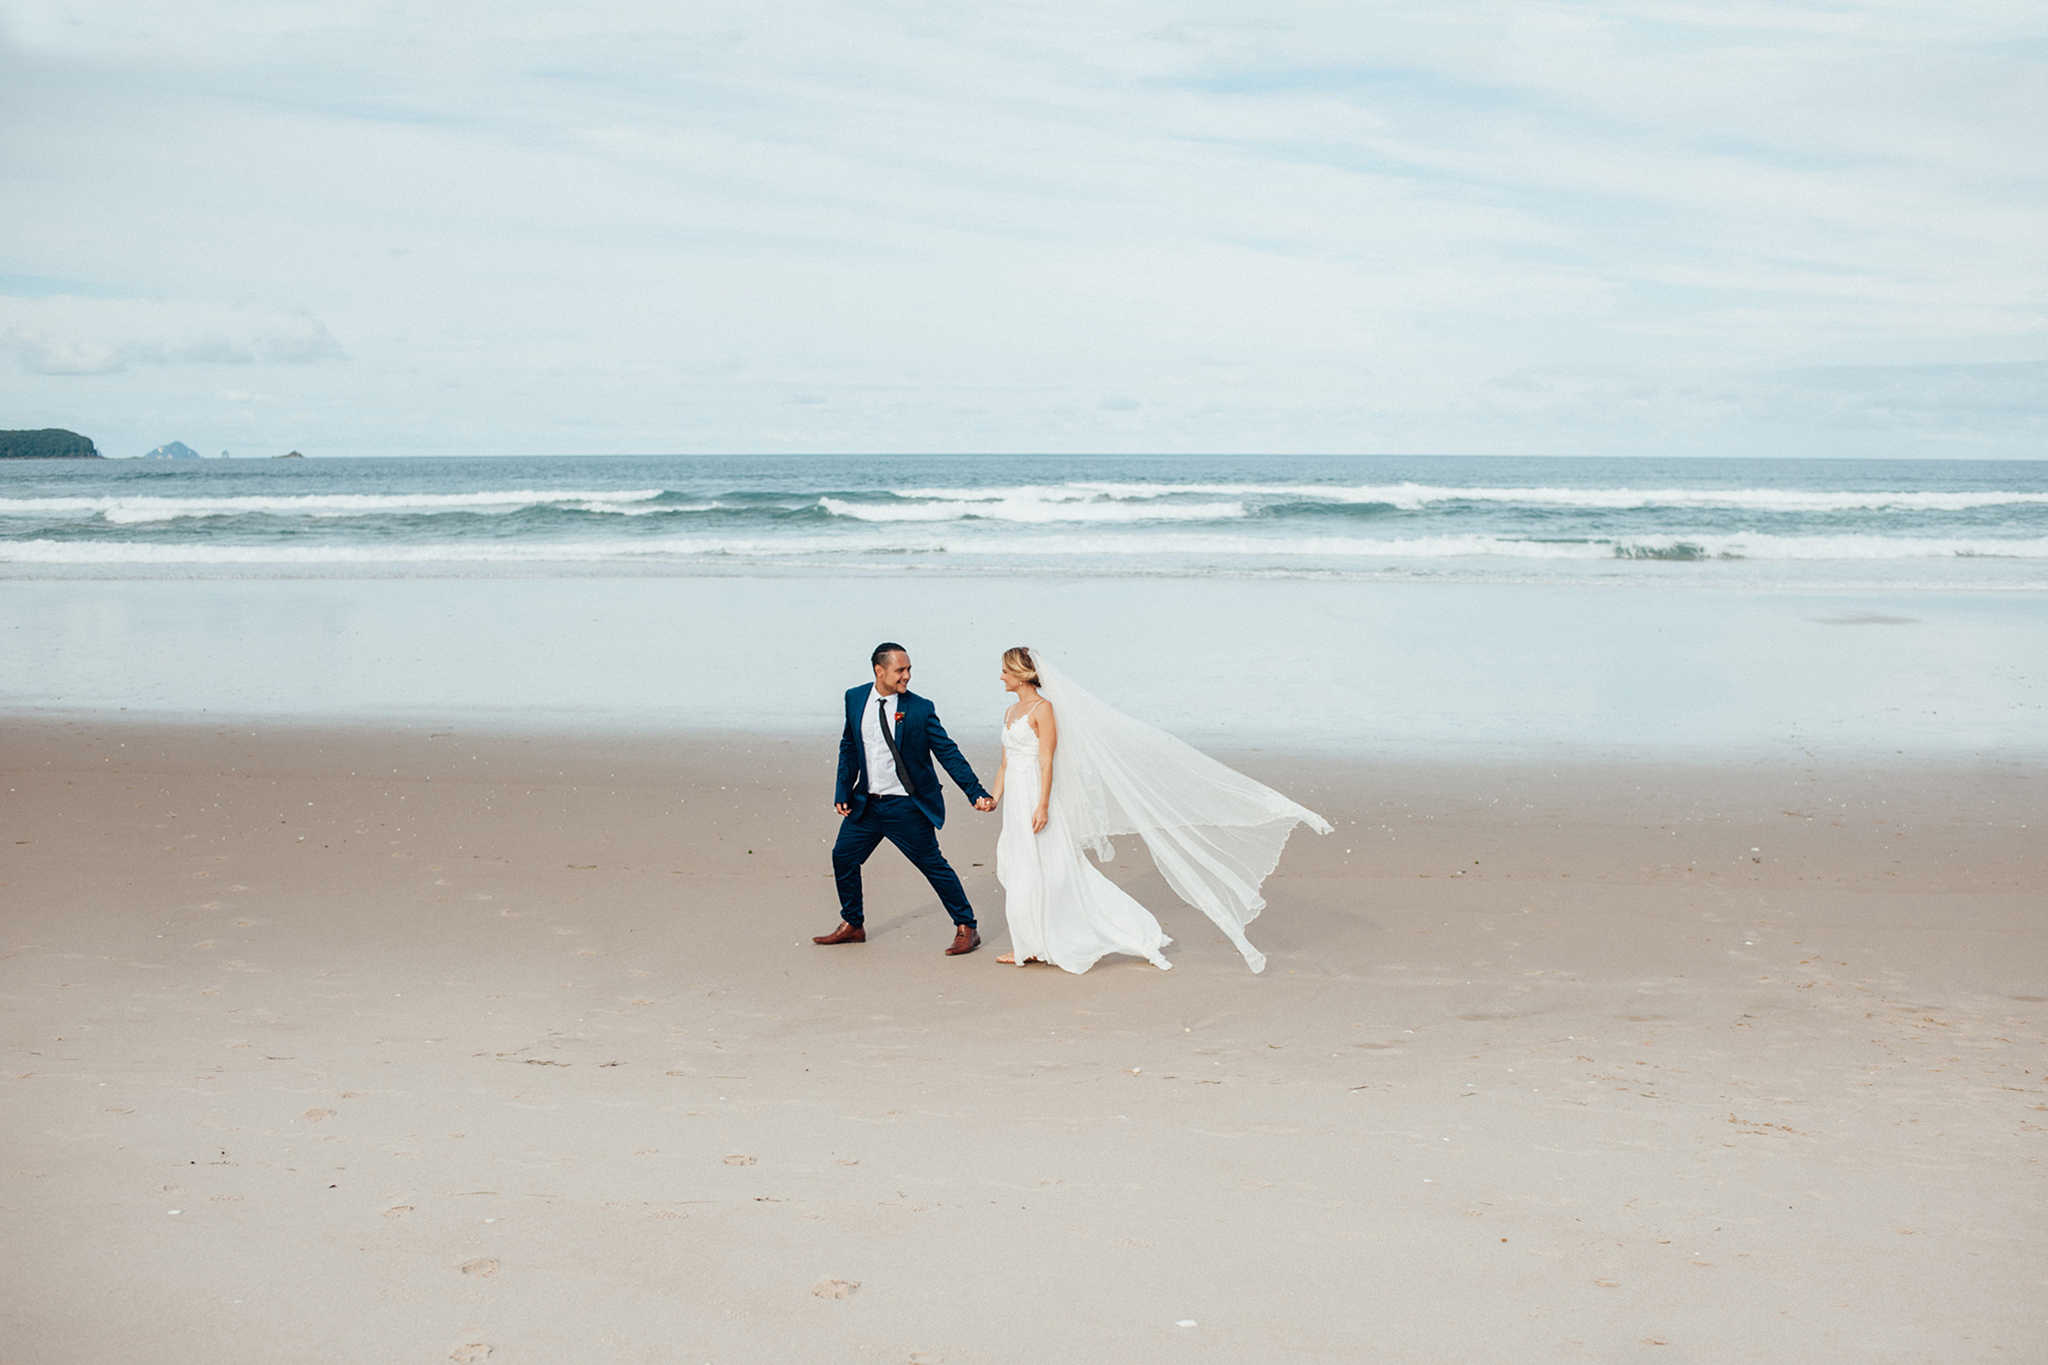 Wedding photography opoutere bride and groom beach adventure